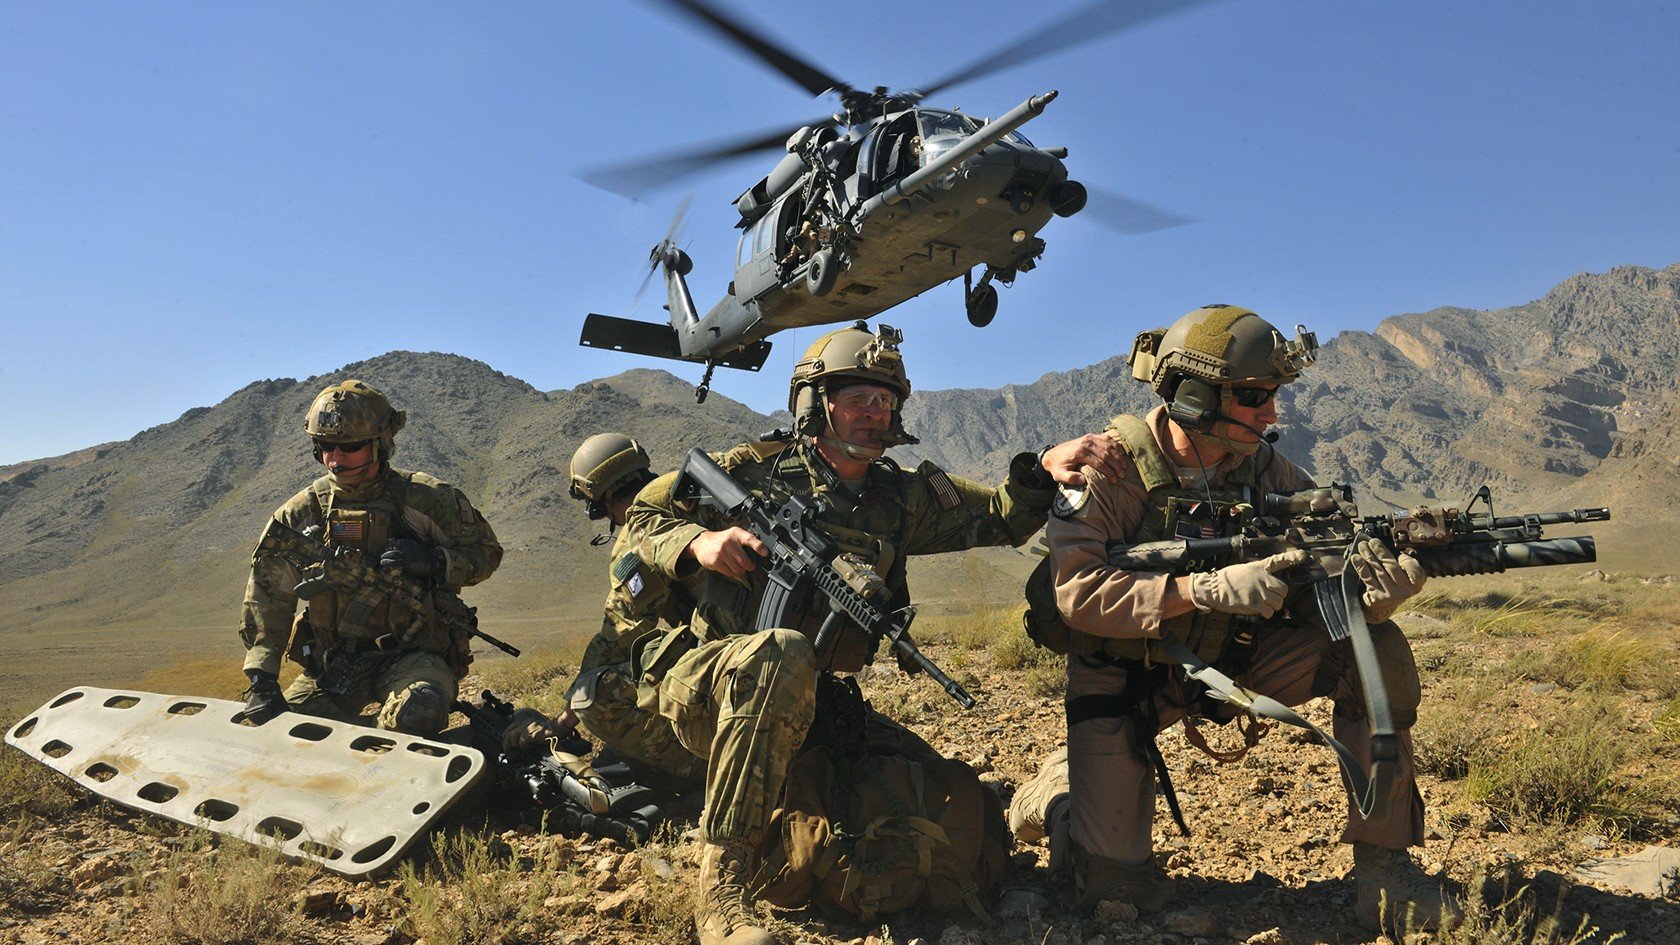 Air Force Pararescue wallpapers, Military, HQ Air Force Pararescue pictures